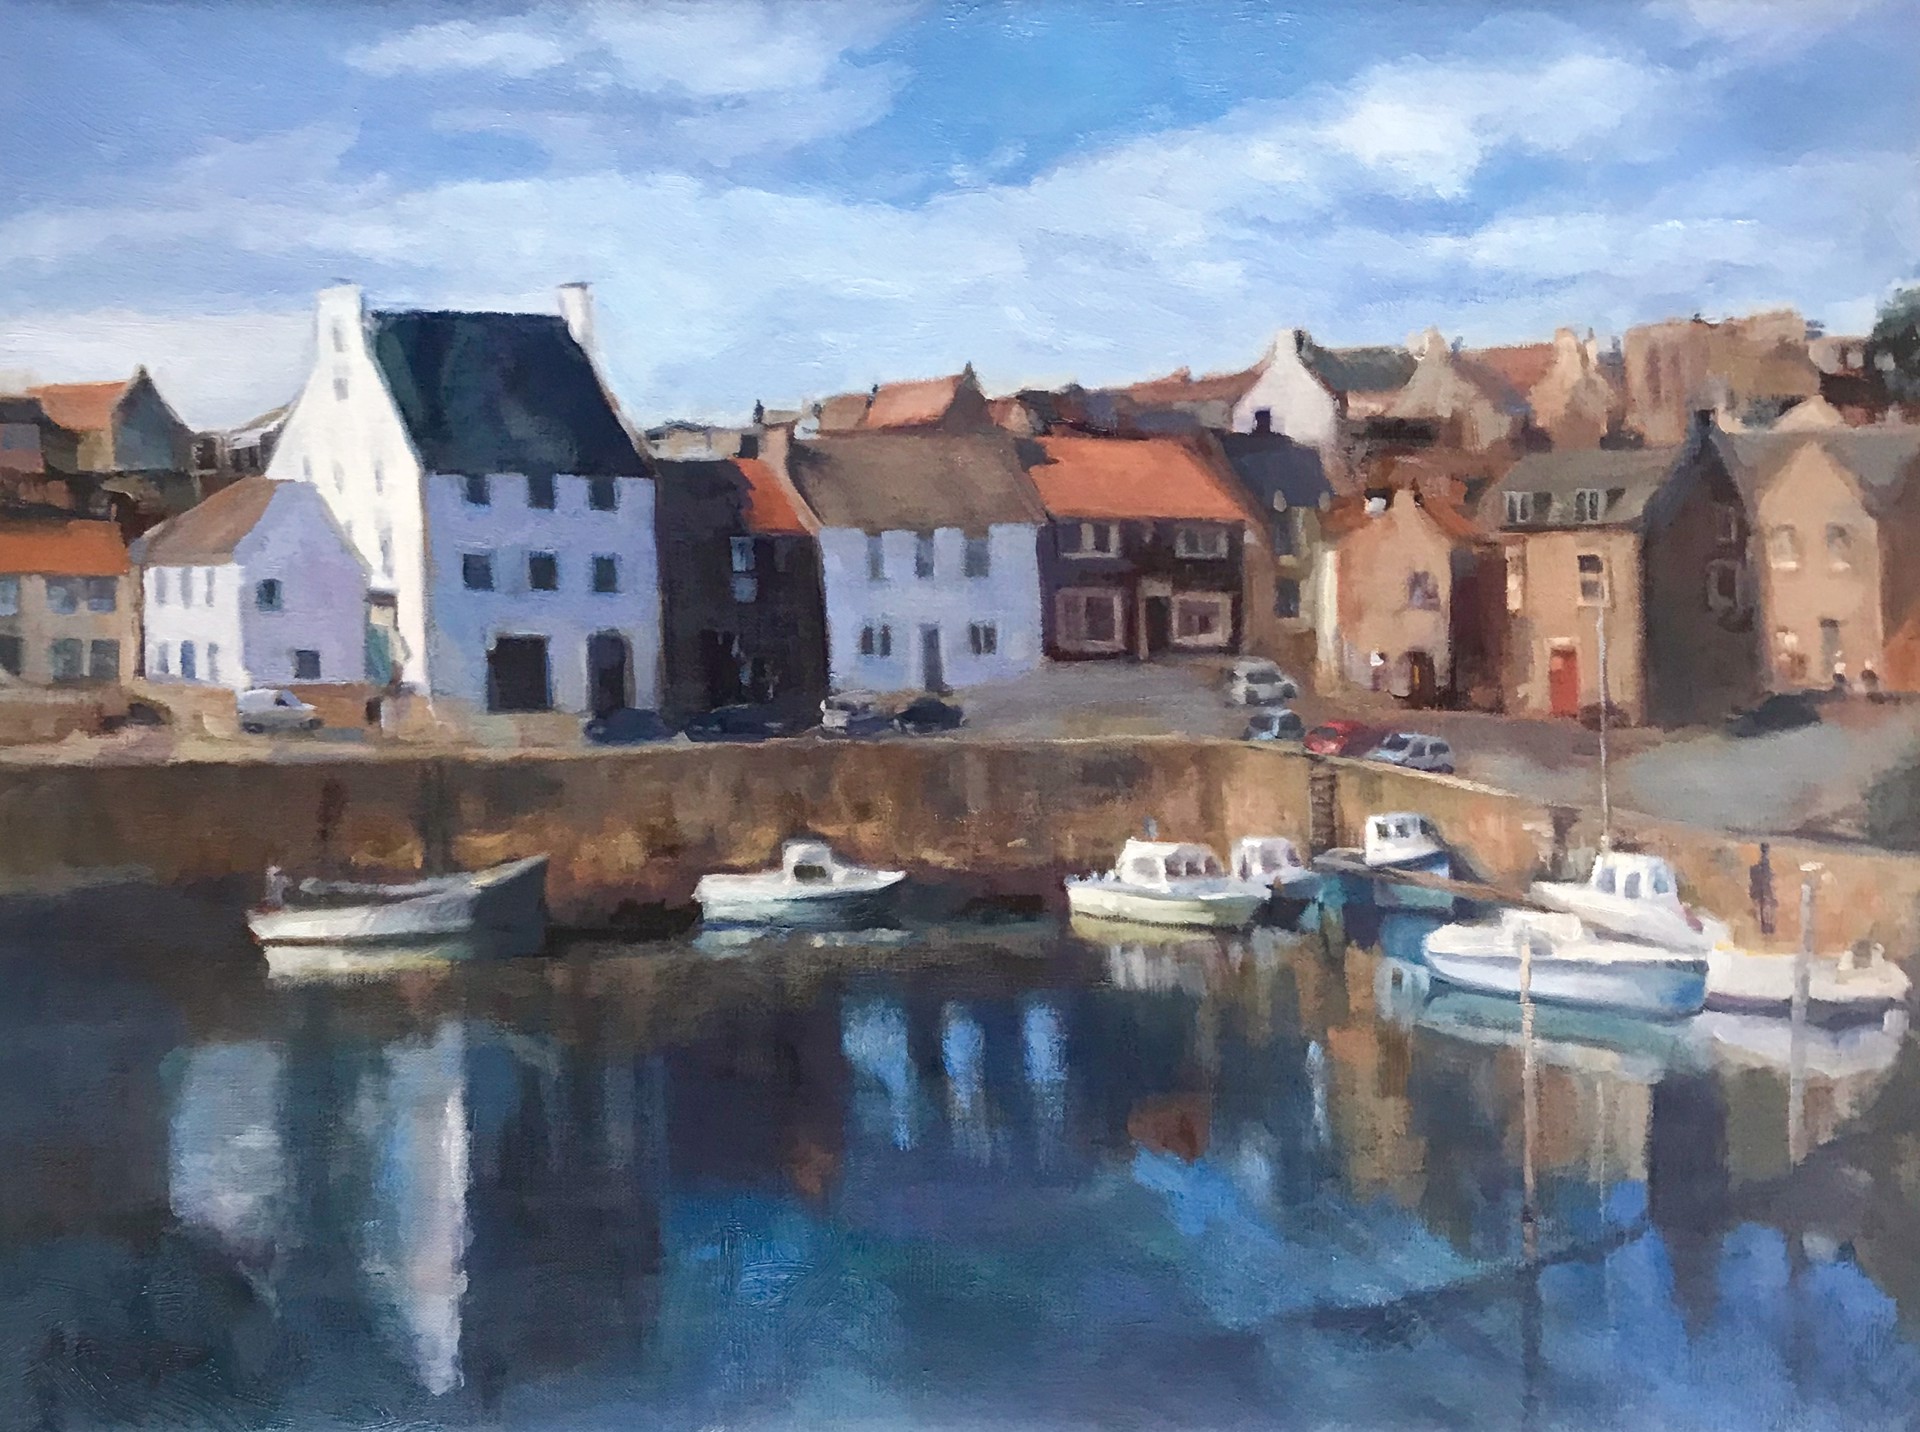 "The East Neuk of Fife" Original oil painting by Mary Ann Cope